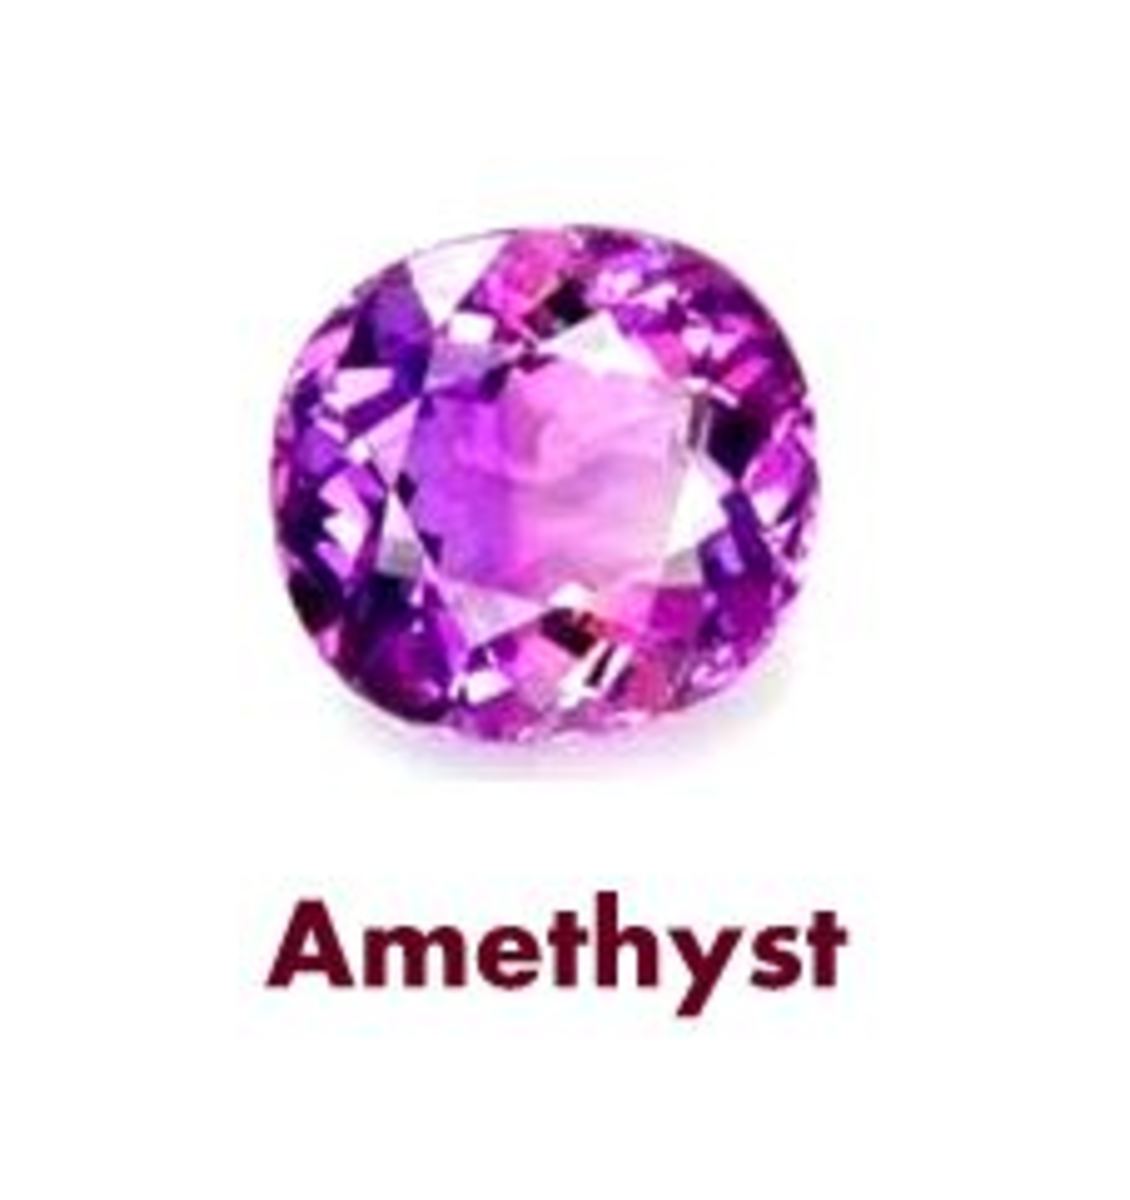 Amethyst Gemstone is the Birthstone of February and a popular substitute of Blue Sapphire. It is also the wedding anniversary stone for 4th, 6th and 17th year of Marriage.